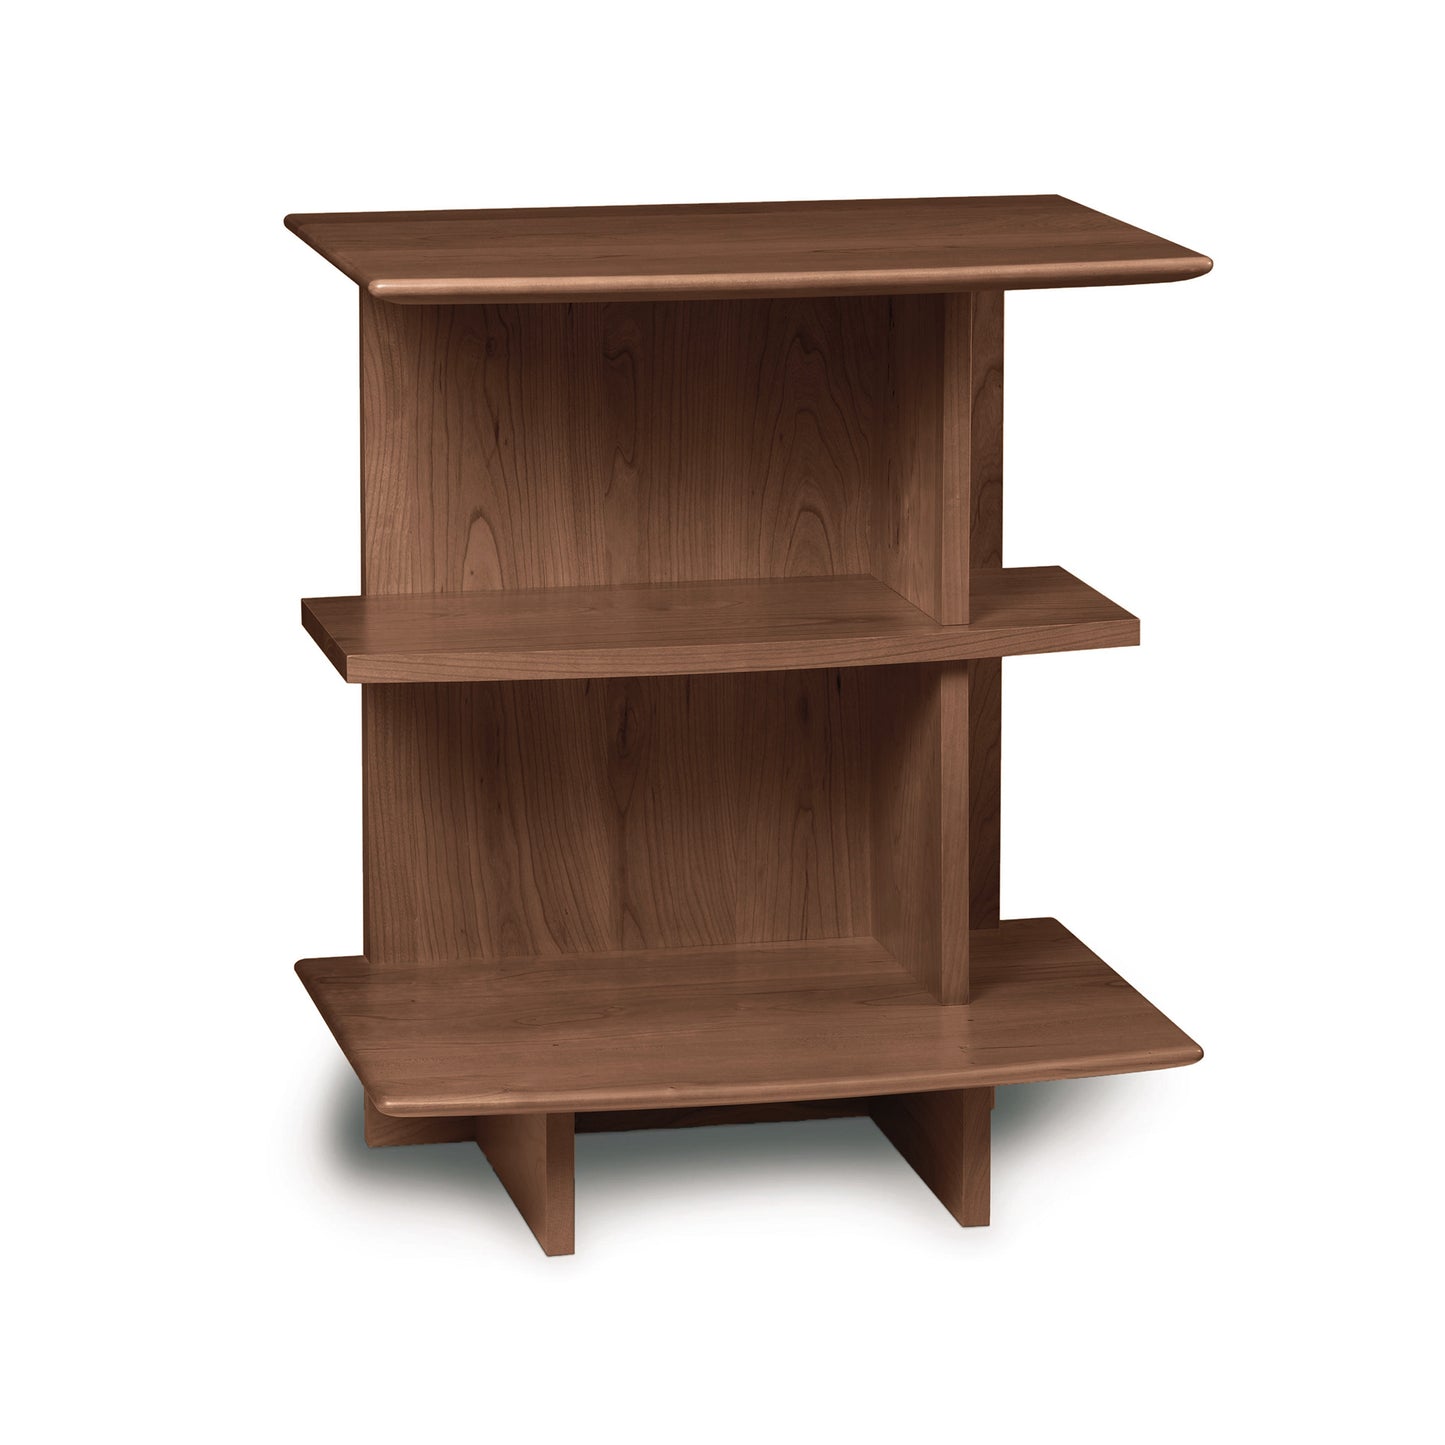 A wooden three-tier corner shelf from the Copeland Furniture Sarah Open Shelf Nightstand isolated on a white background.